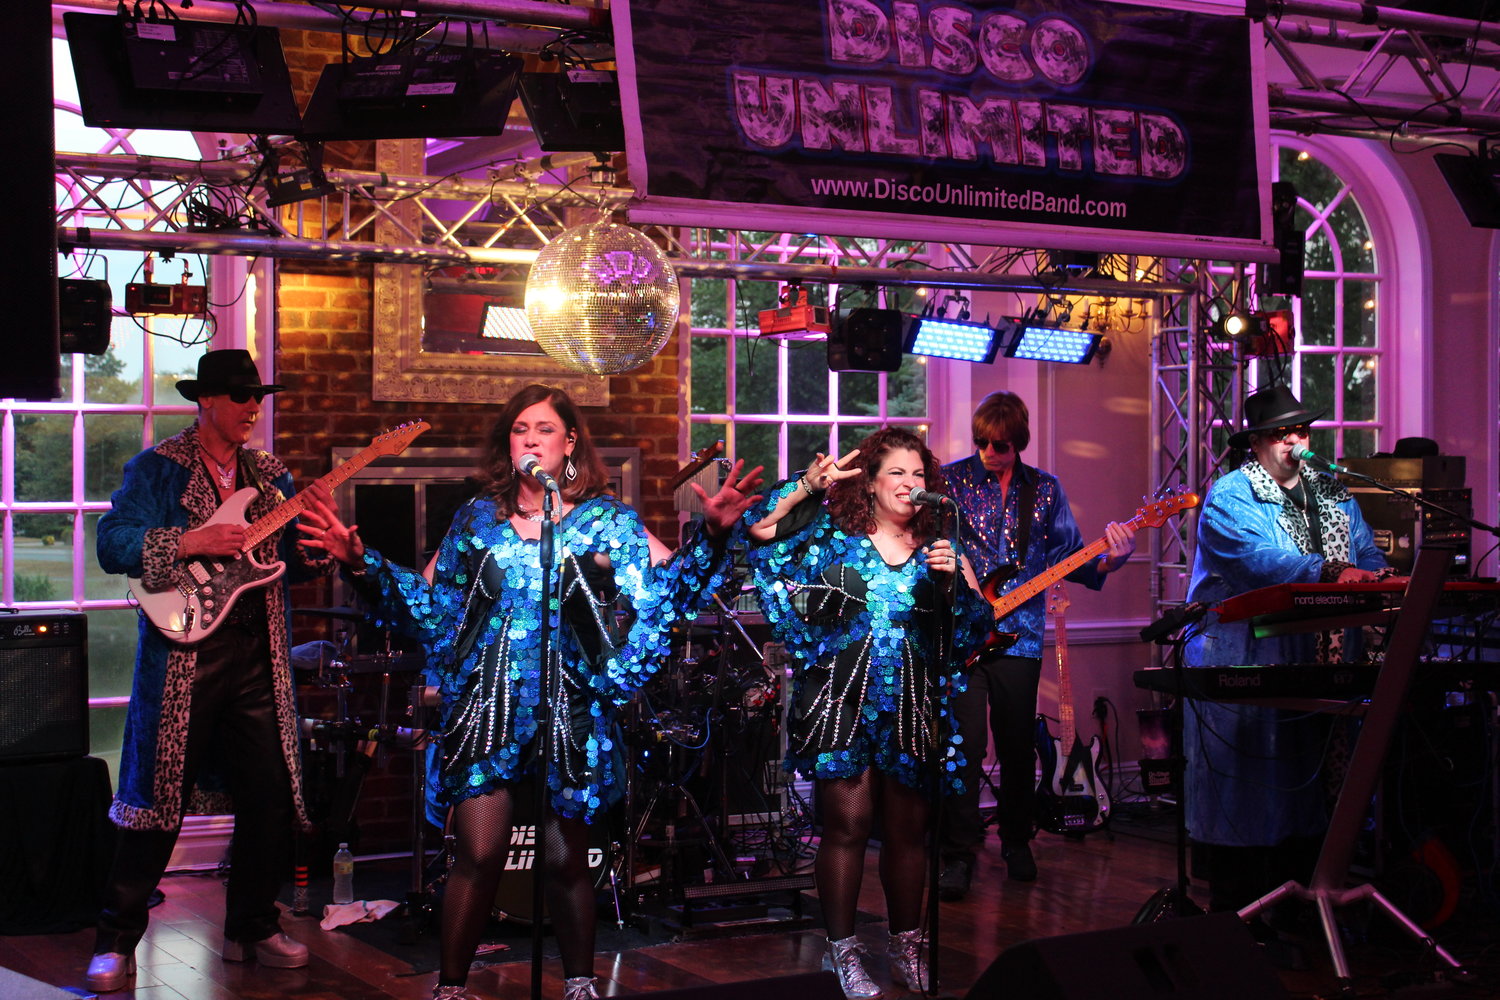 Disco Unlimited played ABBA, the Bee Gees and more 70s hits at the Coral House on July 29 for Kids Need More.